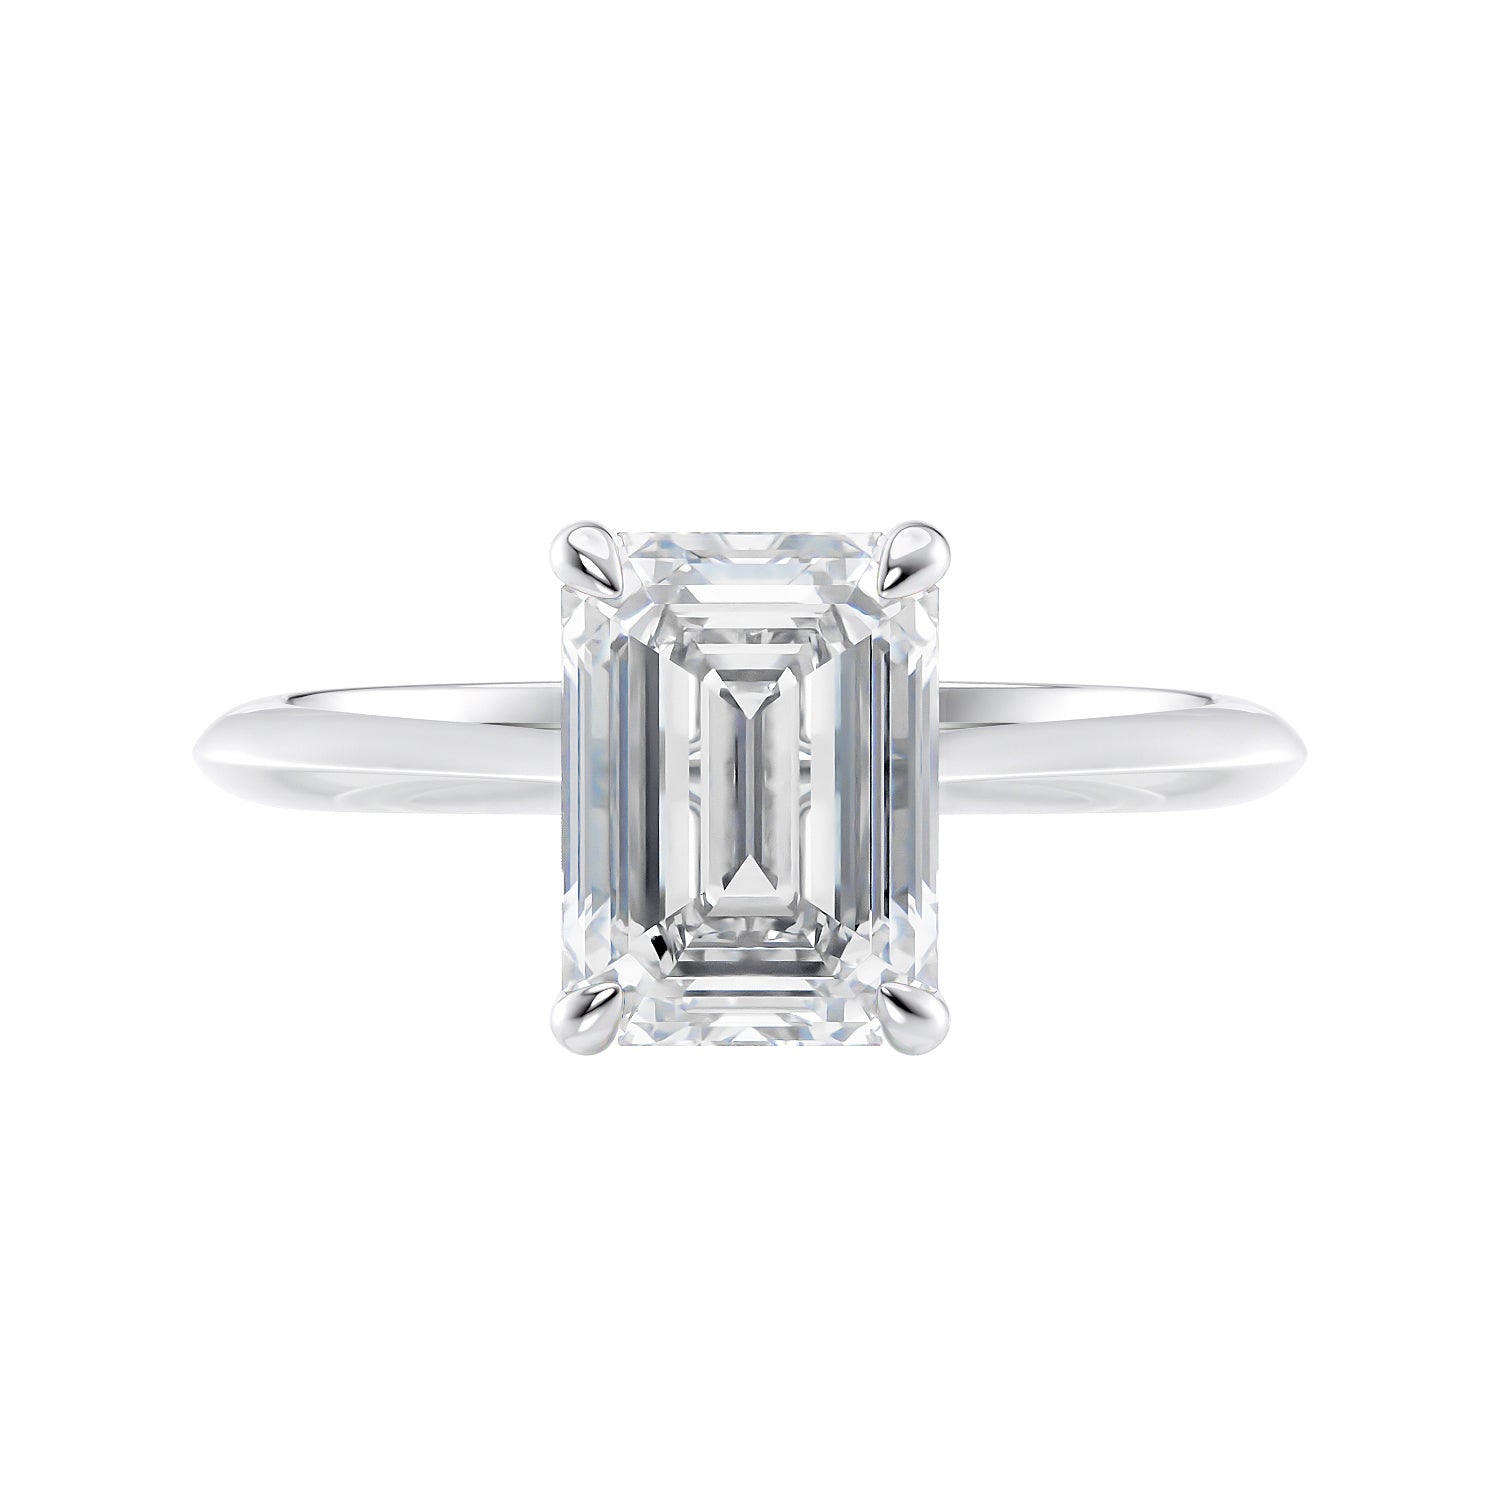 Emerald cut diamond hidden halo engagement ring white gold front view.